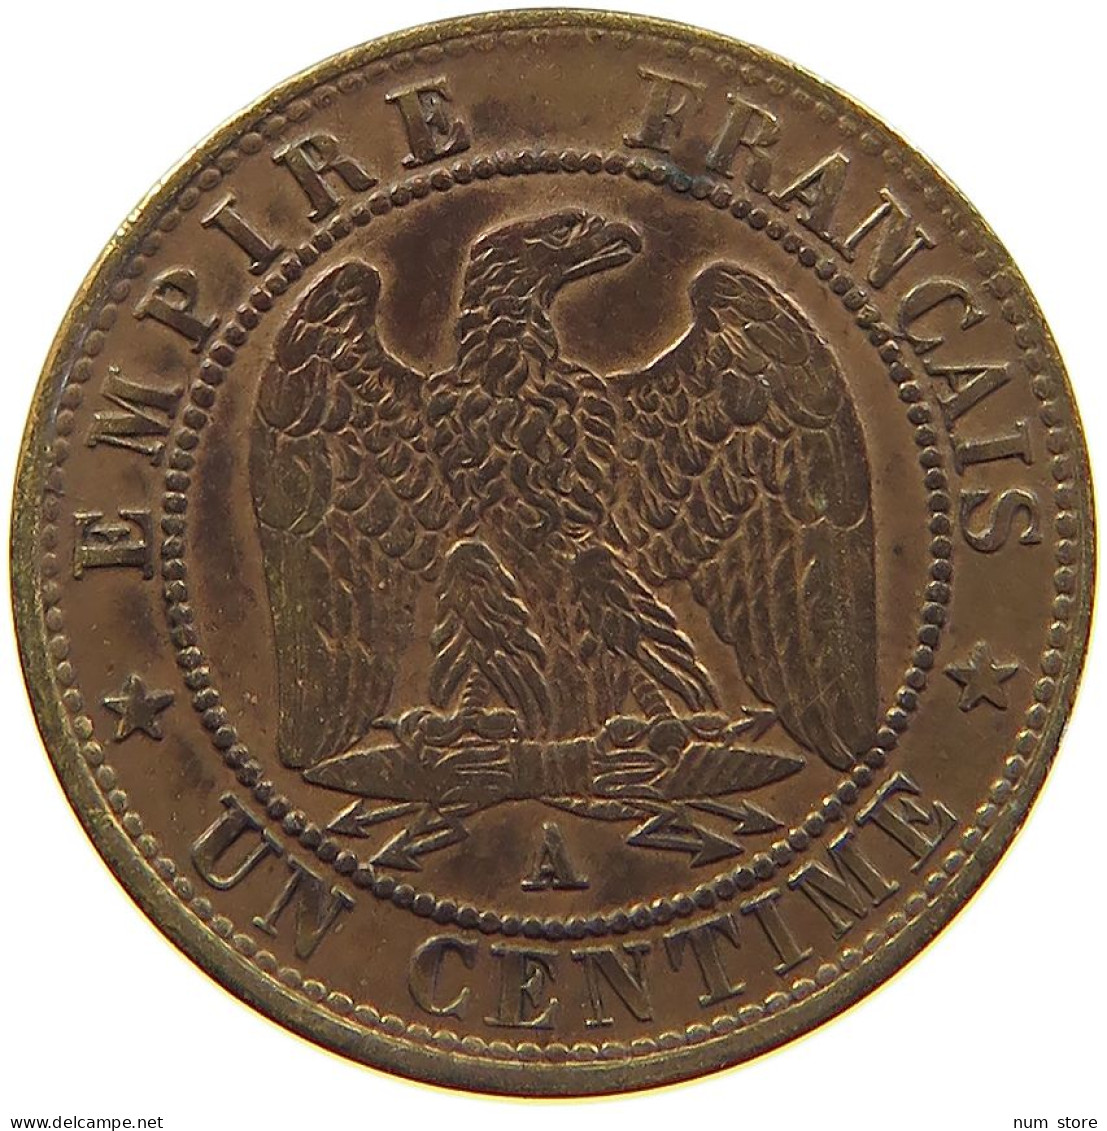 FRANCE CENTIME 1862 A Napoleon III. (1852-1870) #c057 0345 - 1 Centime